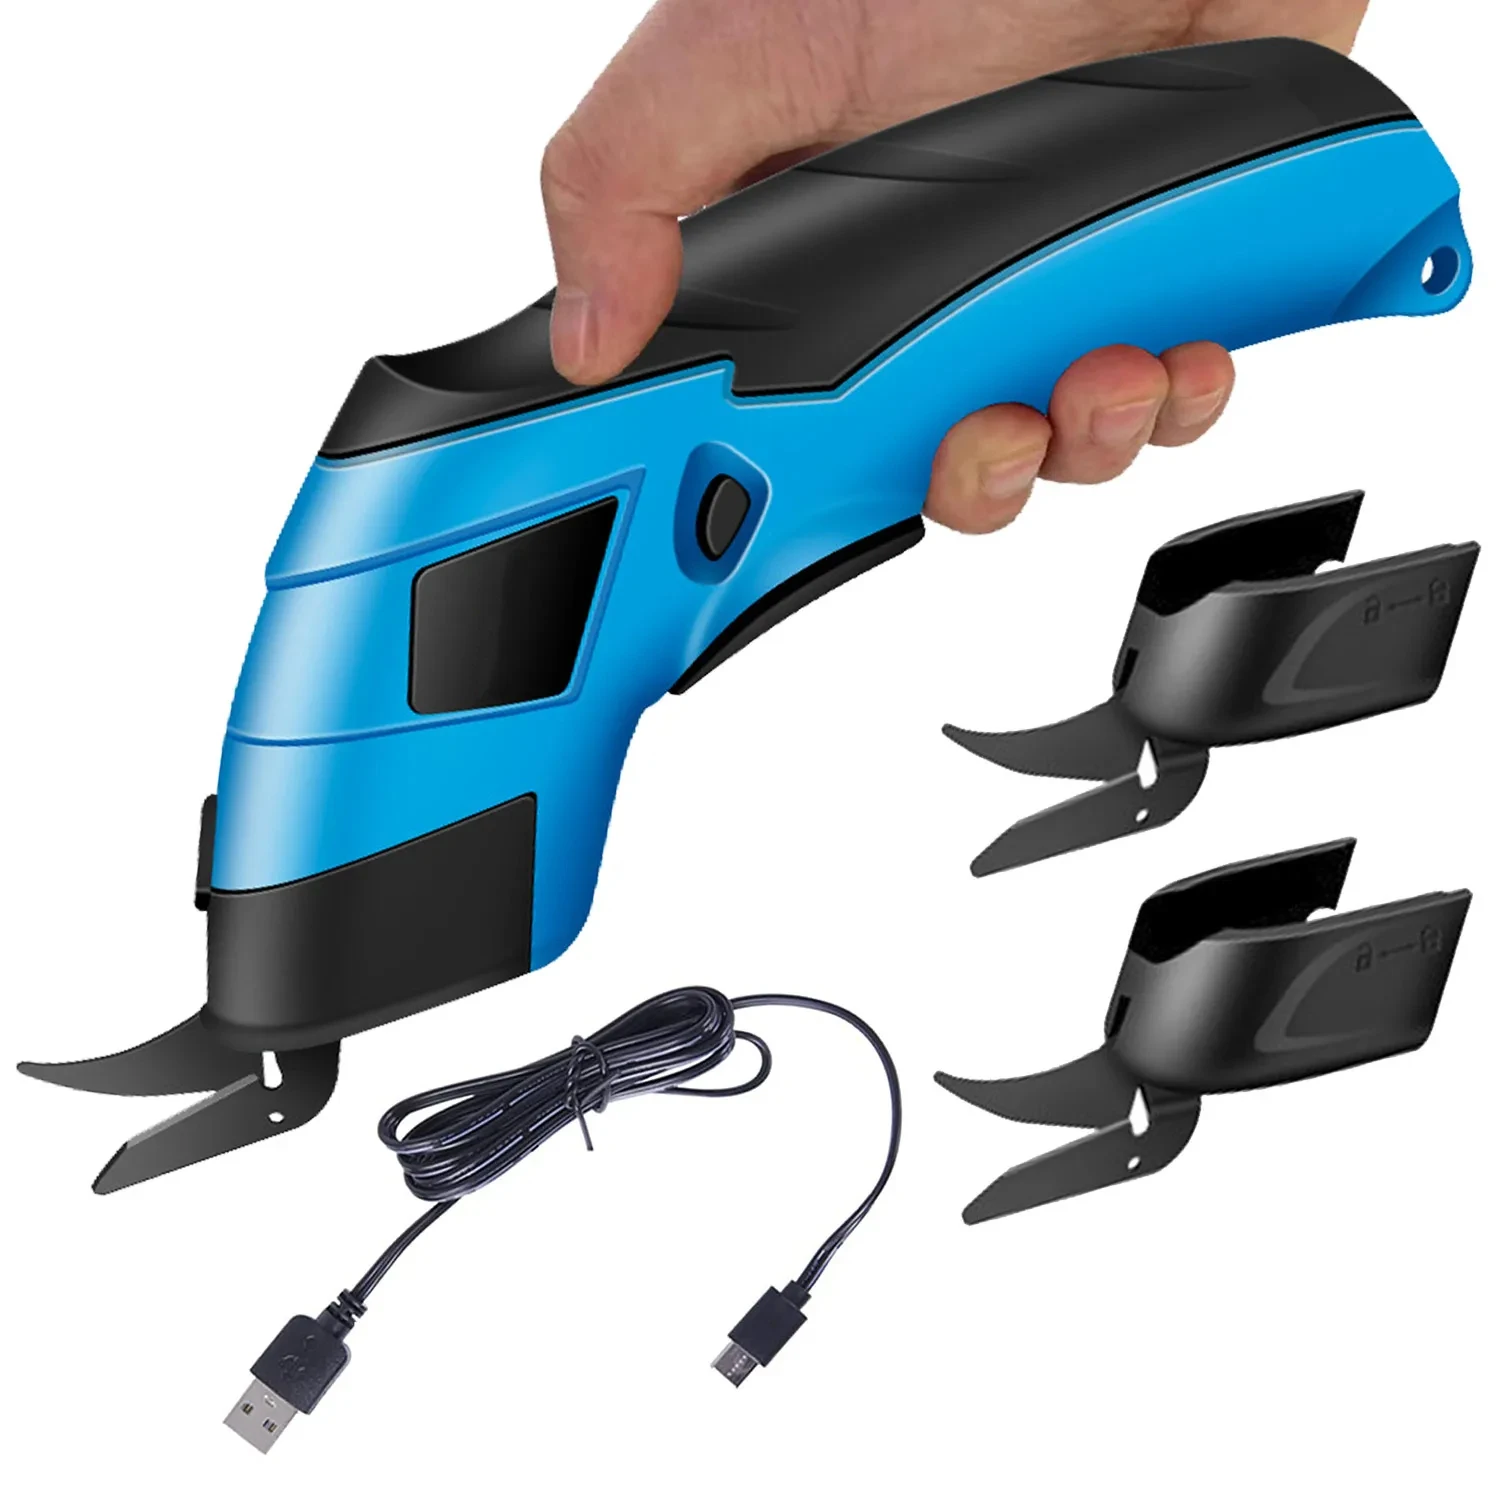 Electric Scissors Fabric Cutting Machine Leather Tailor Scissors With Tungsten Steel Blades USB Rechargeable Portable Power Tool blades hand tools practical resistance tungsten steel cutting tools fits most cutting plotter hard anti static